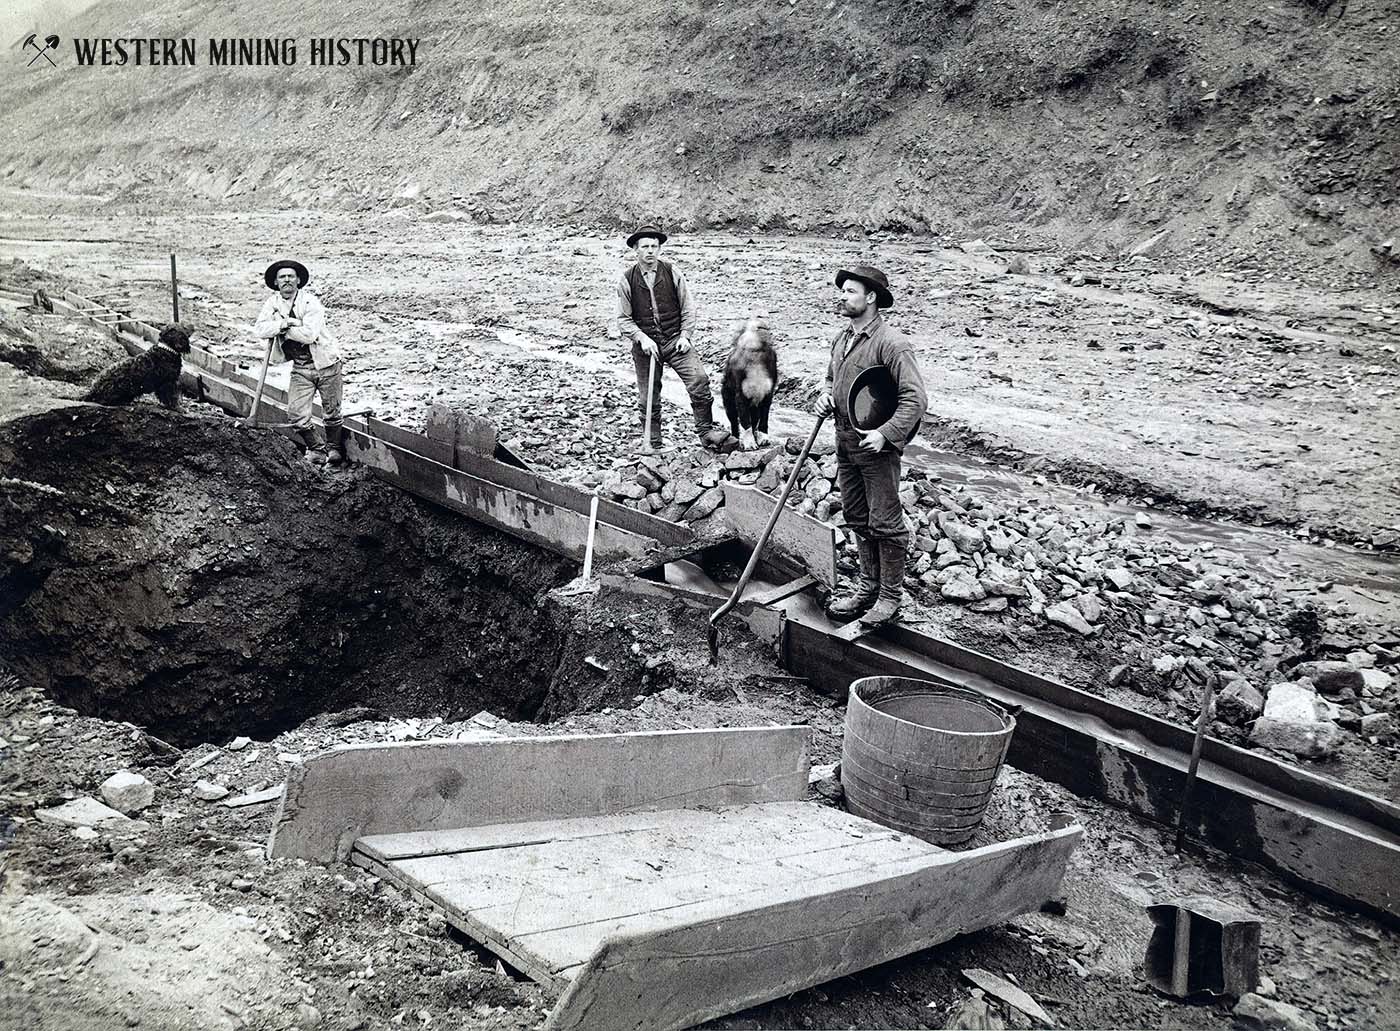 Placer miners in the Deadwood area late 1800s